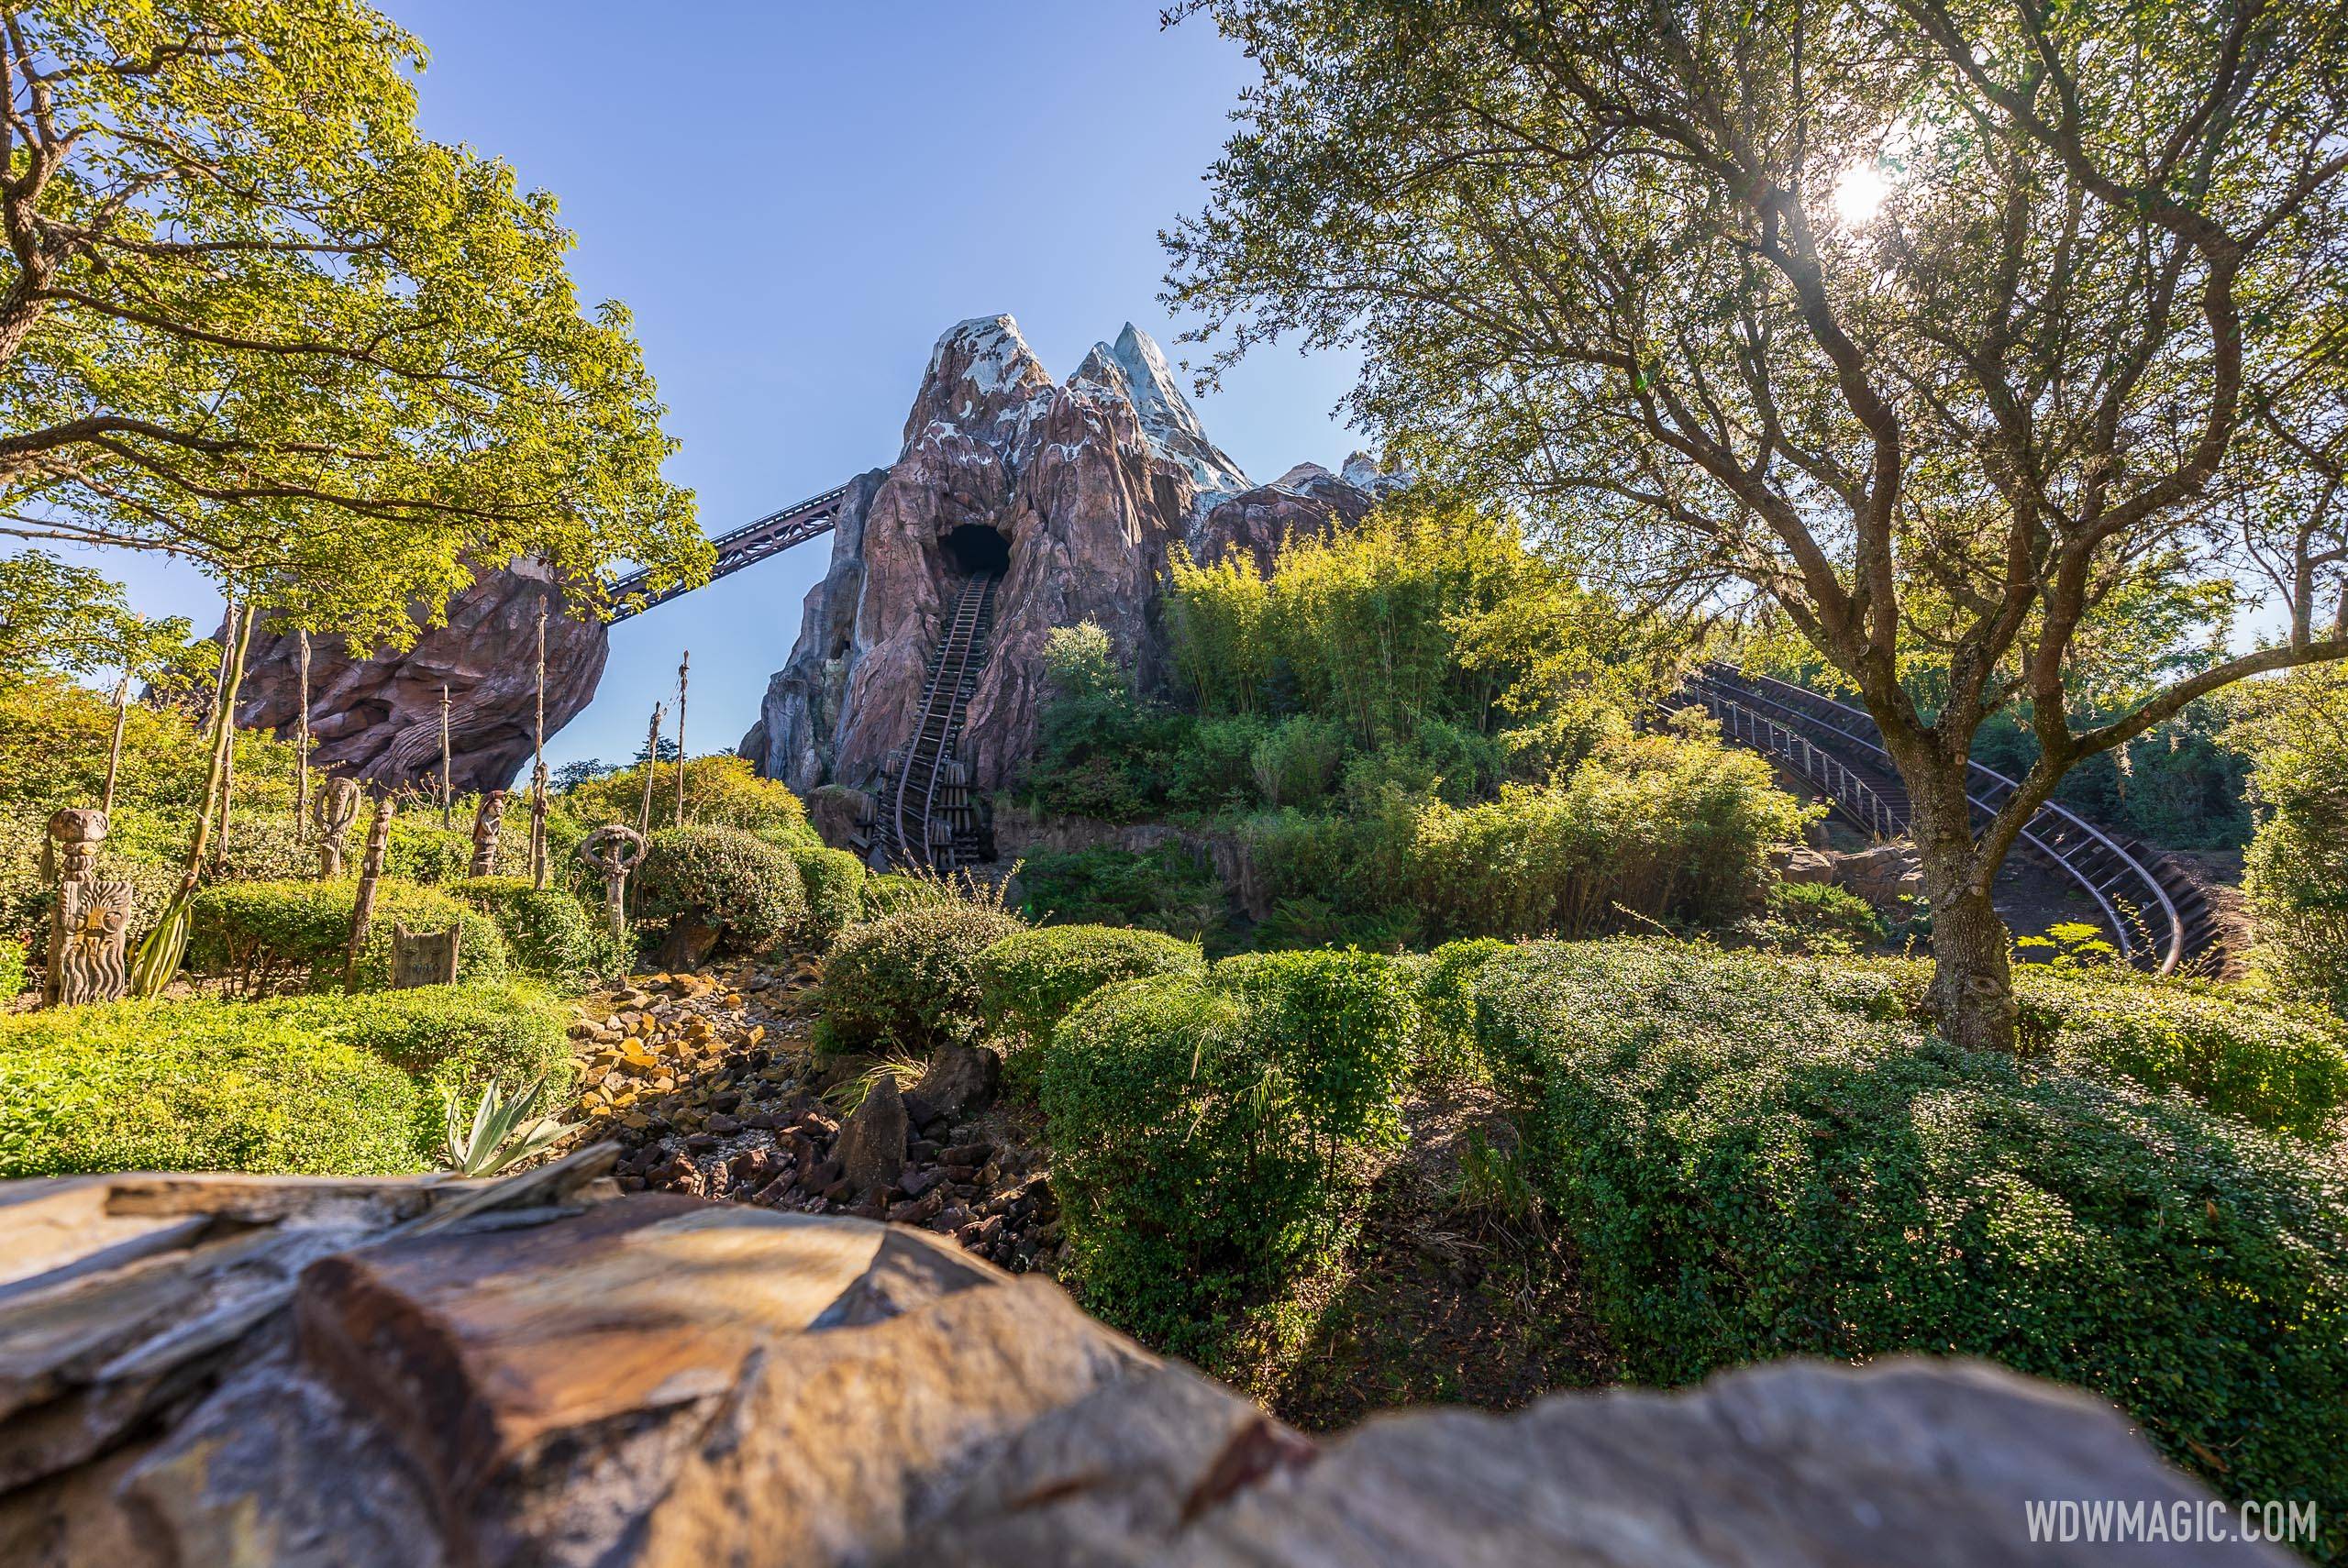 Expedition Everest closed for refurbishment January 2022